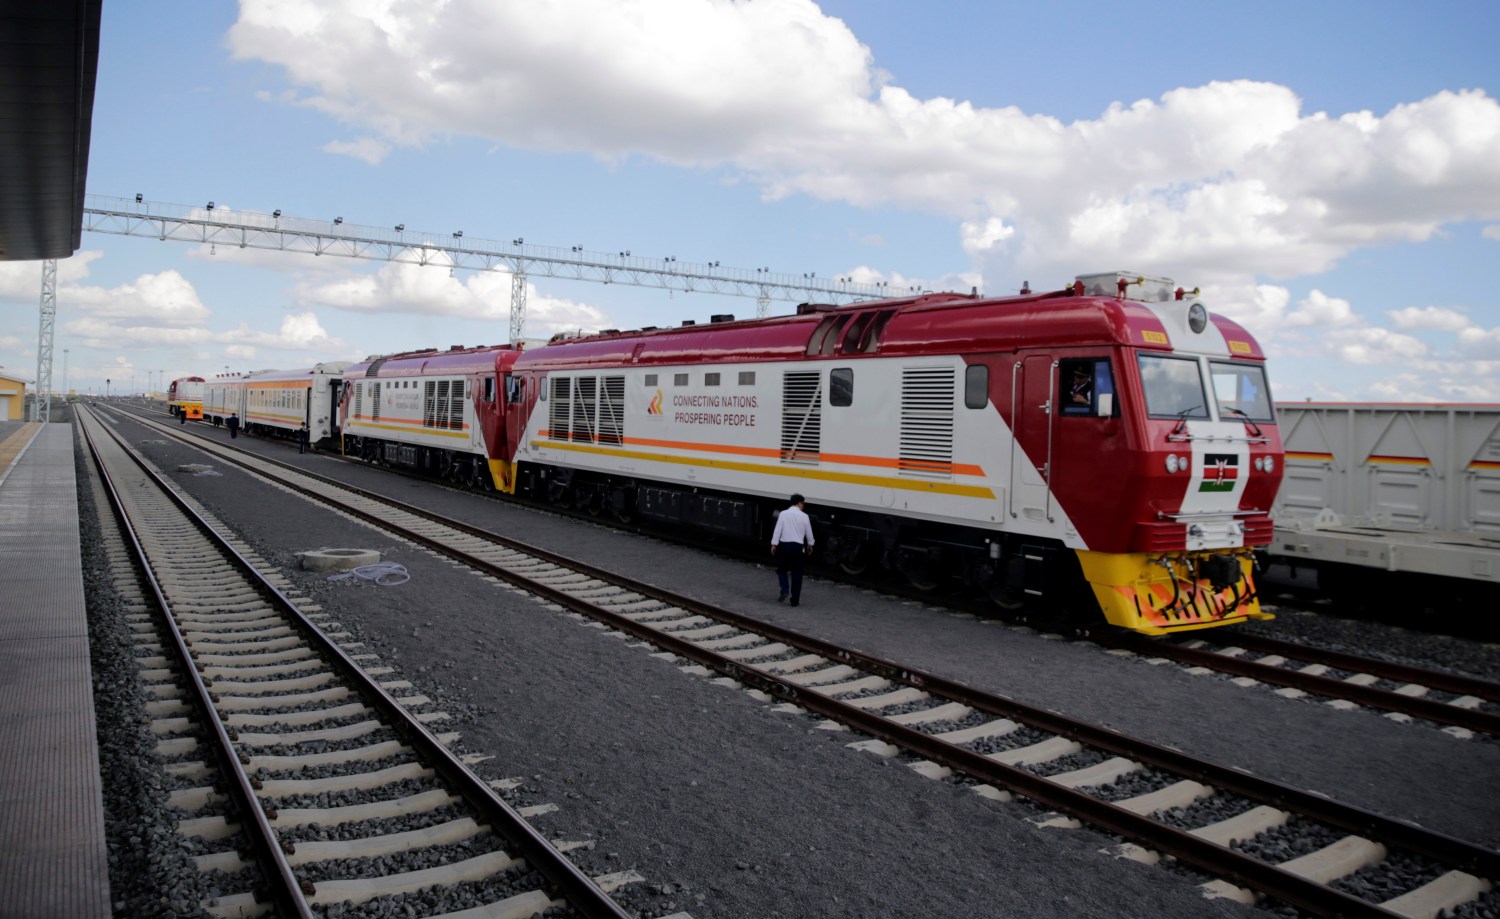 A train launched to operate on the Standard Gauge Railway (SGR) line constructed by the China Road and Bridge Corporation (CRBC) and financed by Chinese government arrives at the Nairobi Terminus on the outskirts of Kenya's capital Nairobi May 31, 2017.